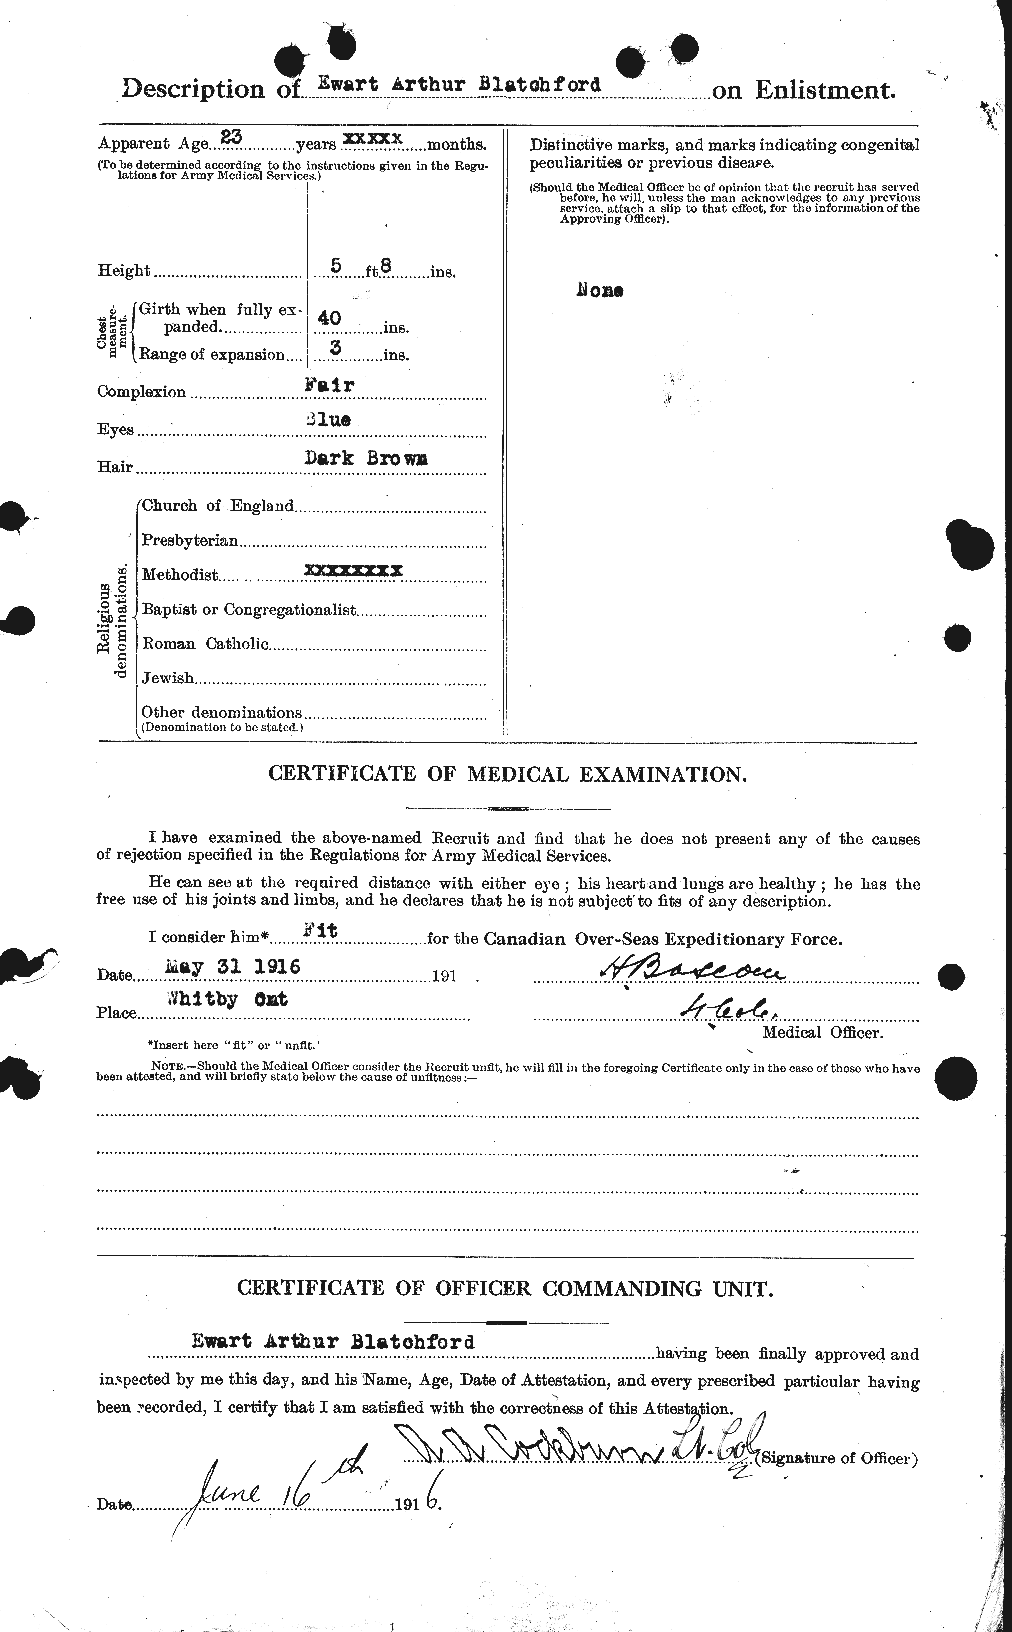 Personnel Records of the First World War - CEF 247798b